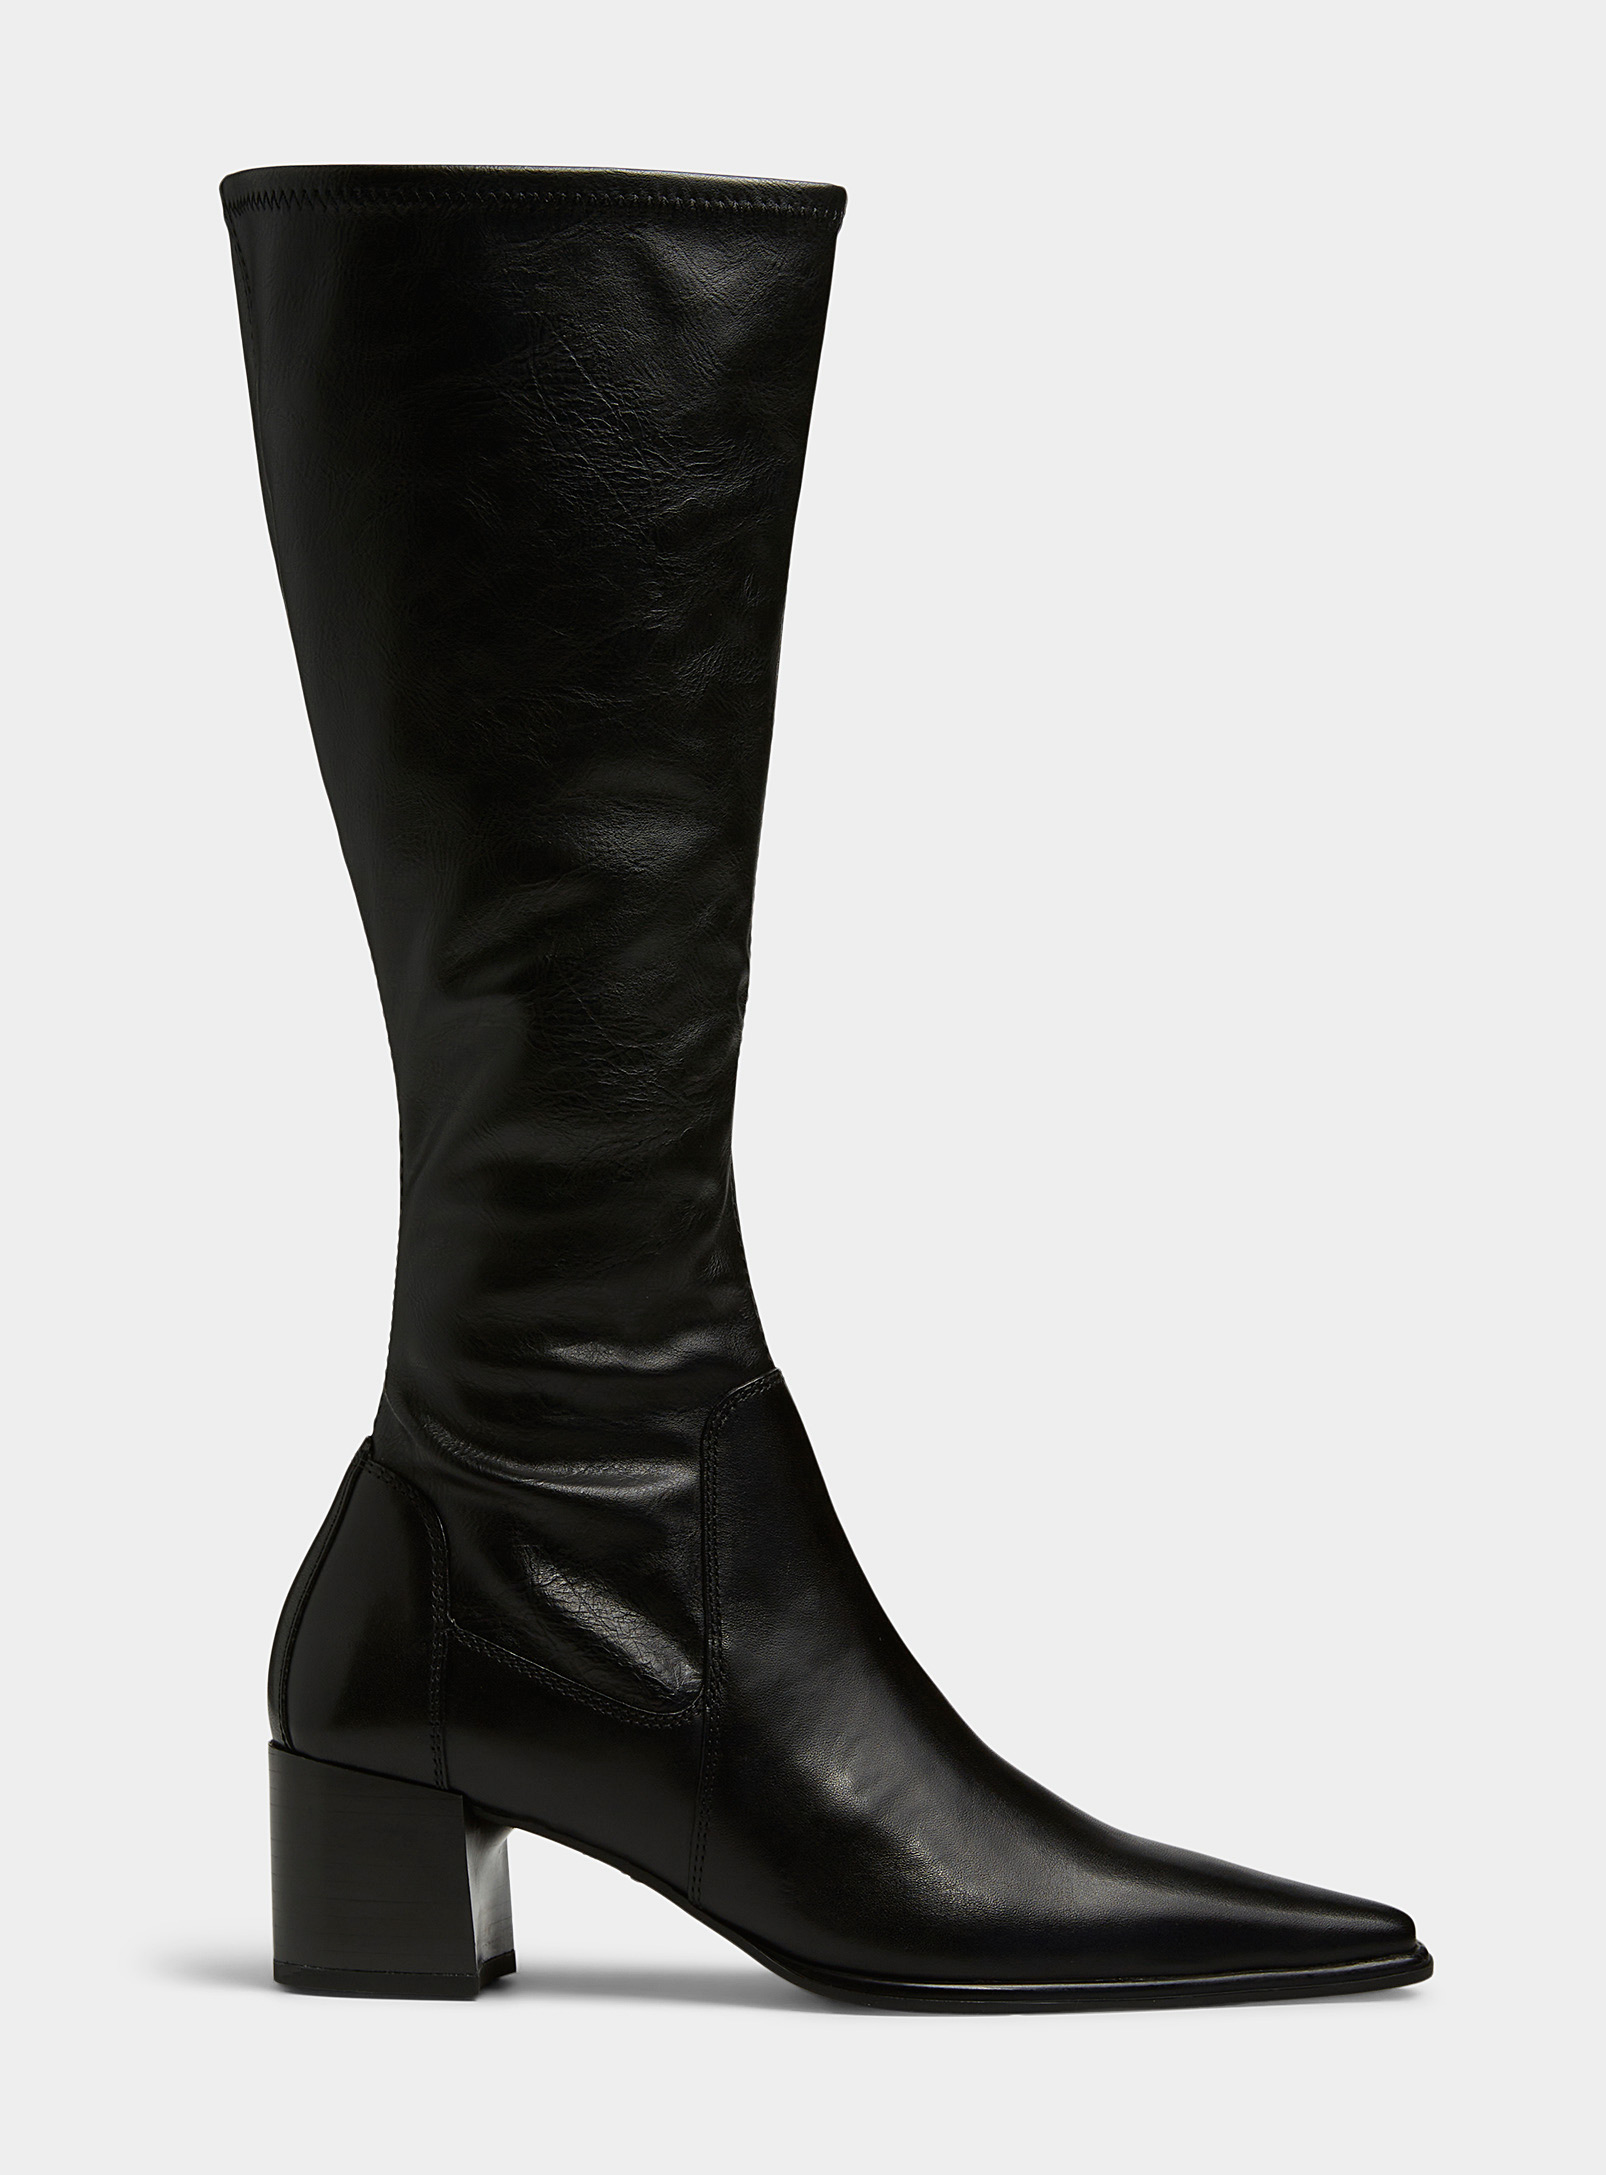 VAGABOND SHOEMAKERS GISELLE SOFT LEATHER KNEE-HIGH BOOTS WOMEN